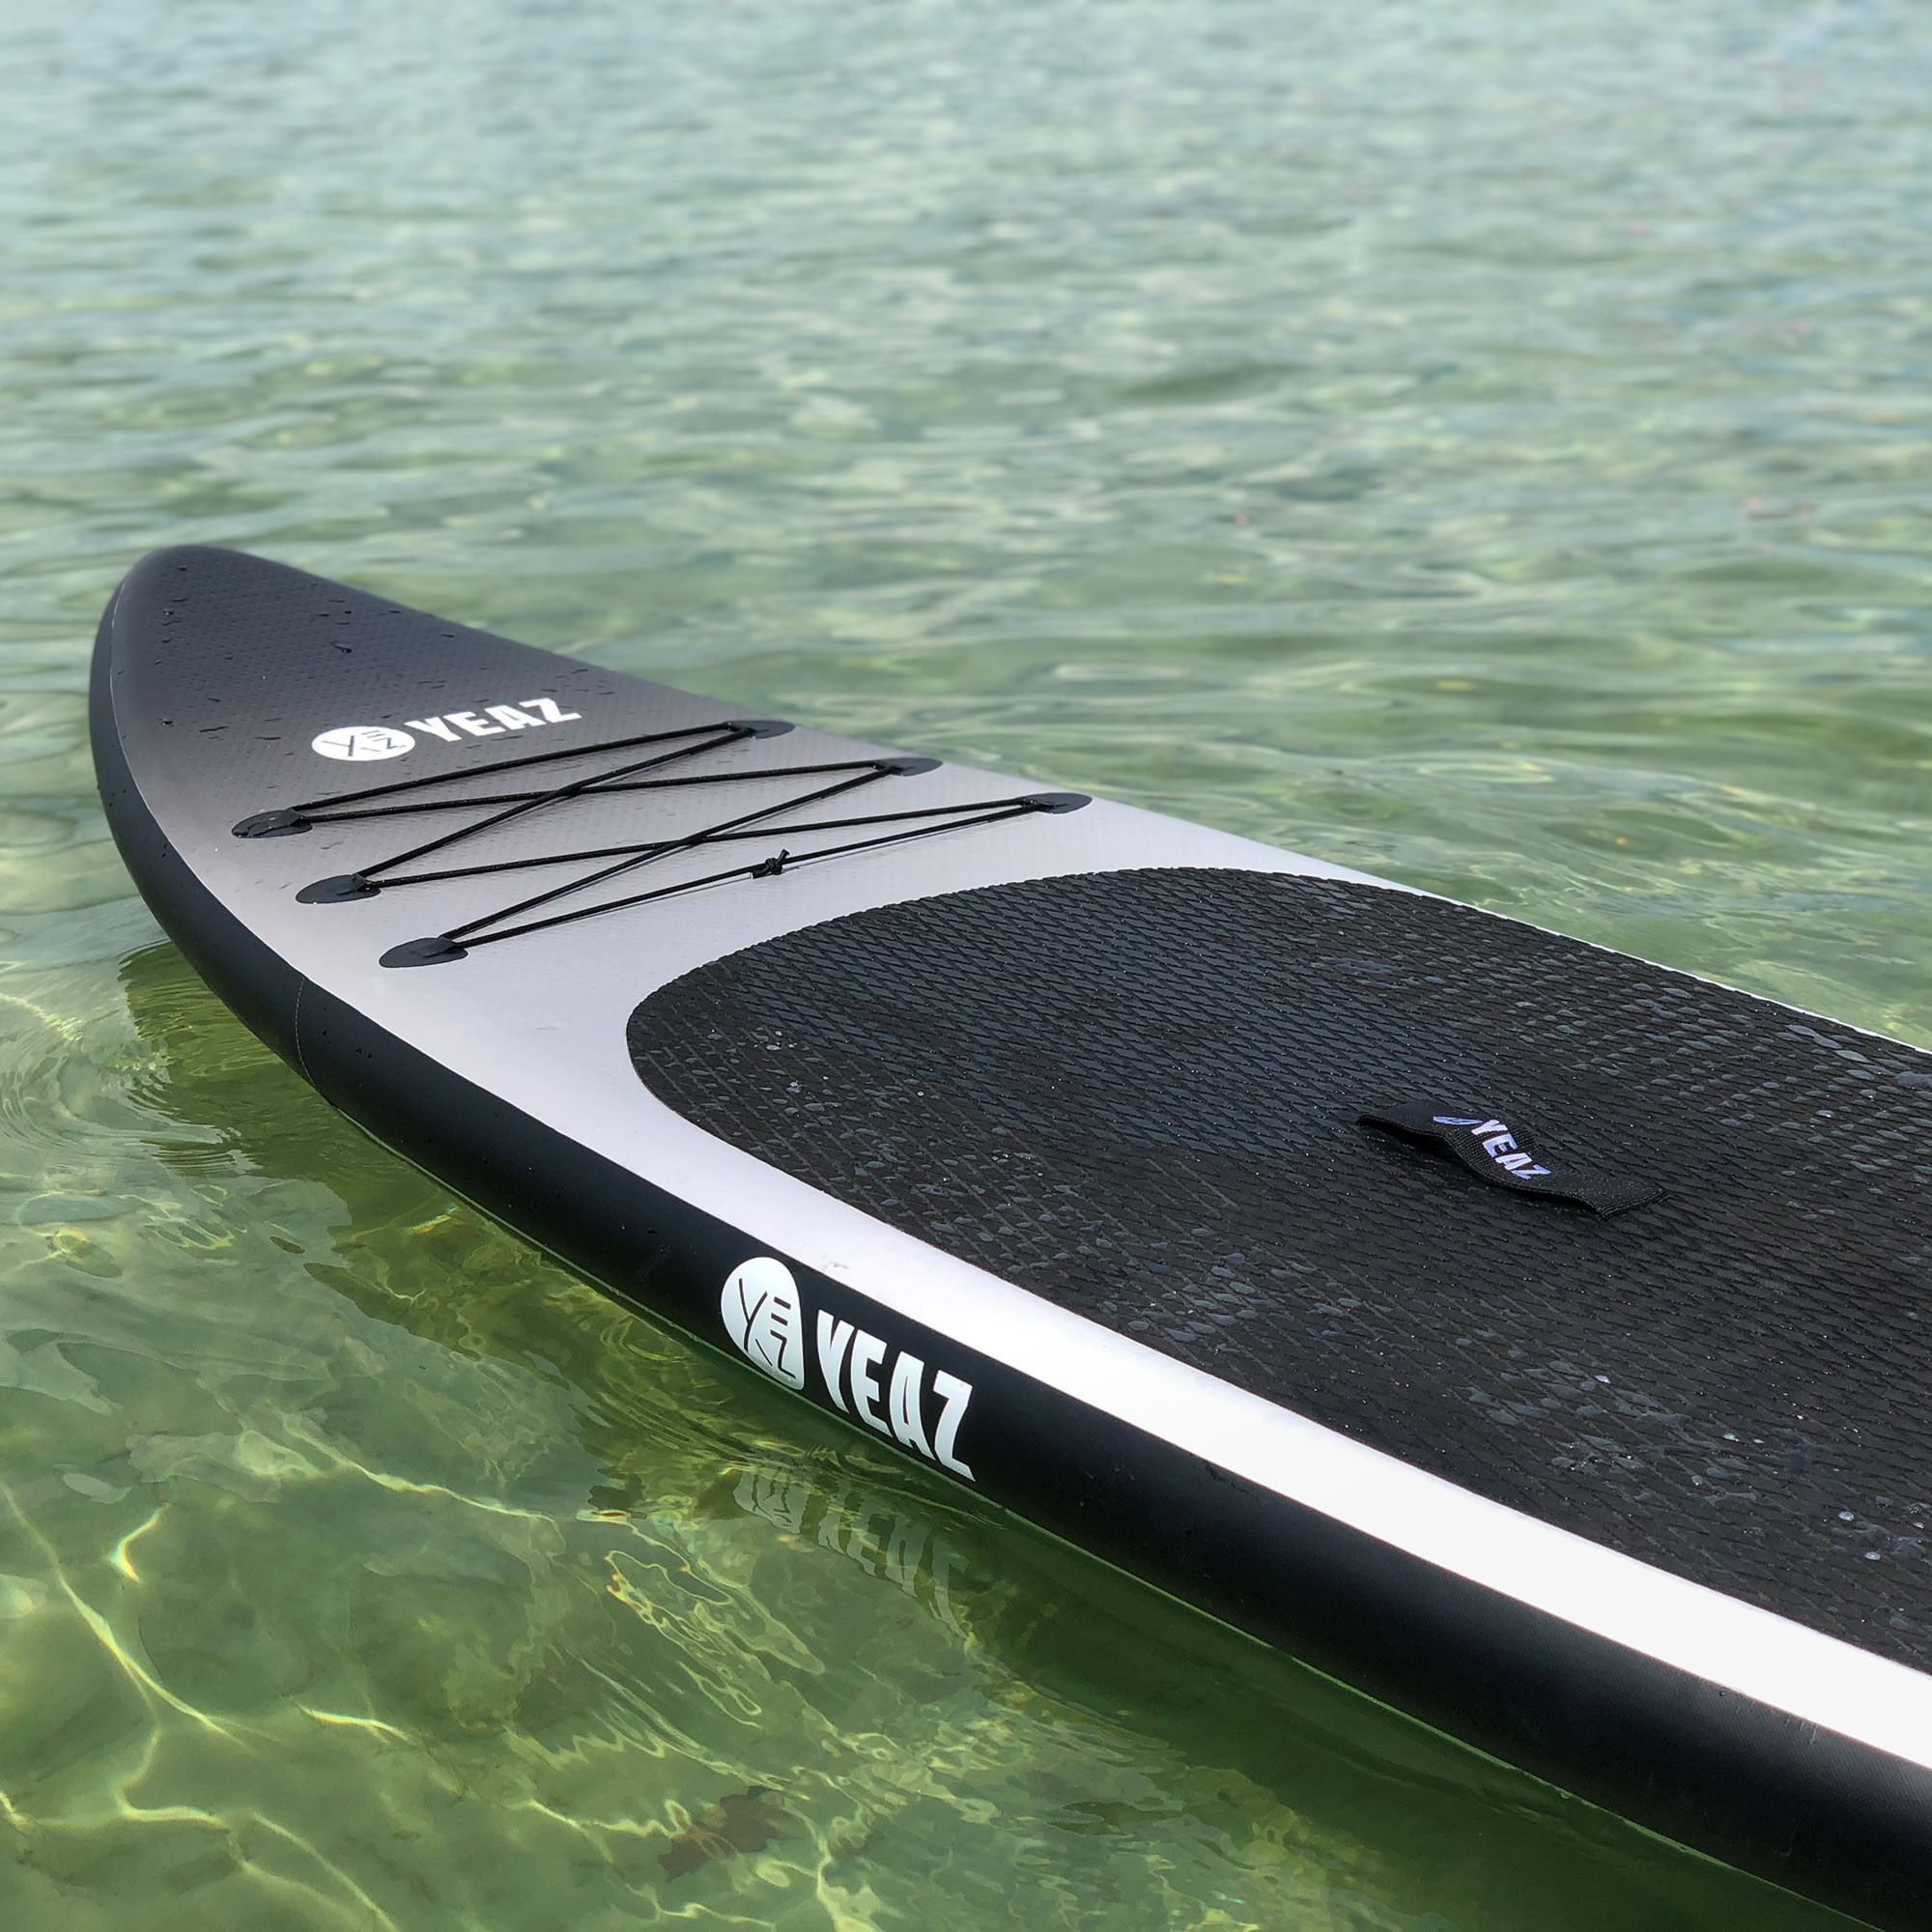 - YEAZ BLACK - shadow SUP, evening SANDS EXOTRACE BEACH